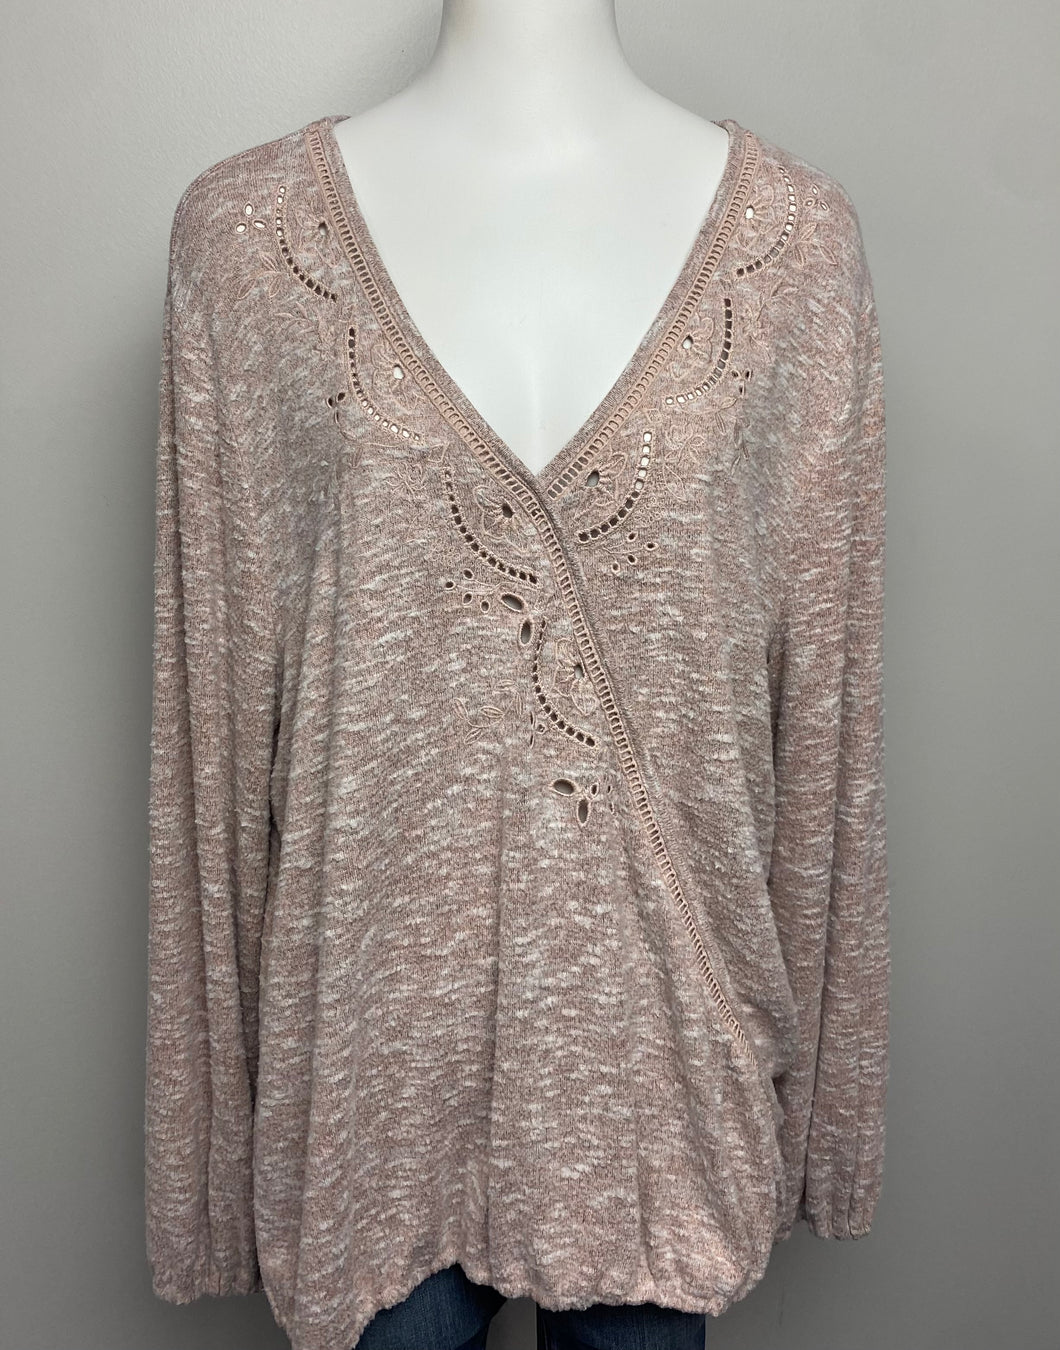 Maurices Sweater- (2X)